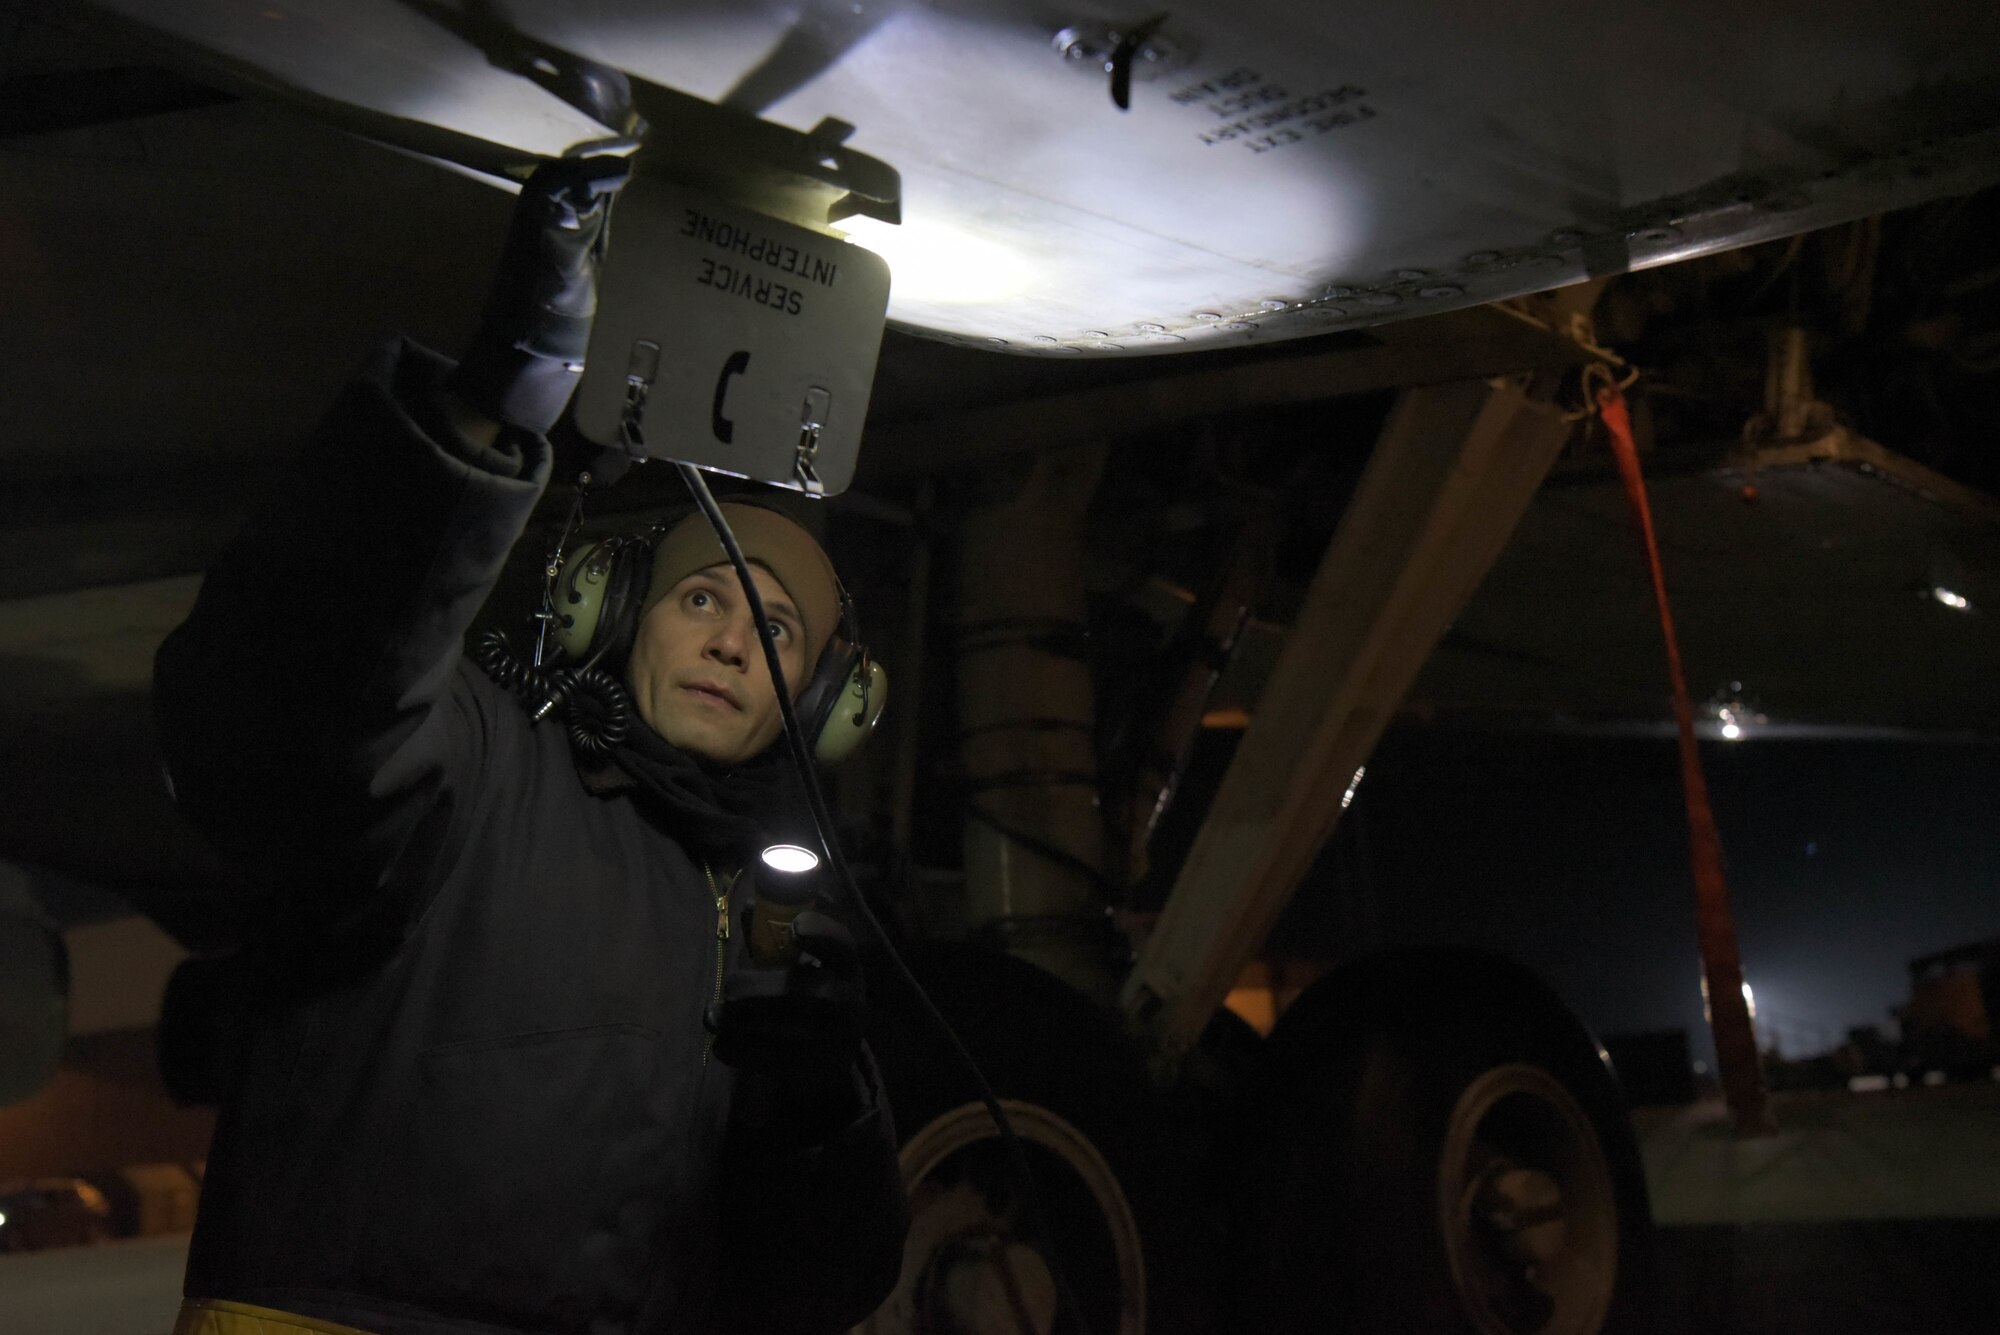 U.S. Air Force Airman inspects aircraft in the dark